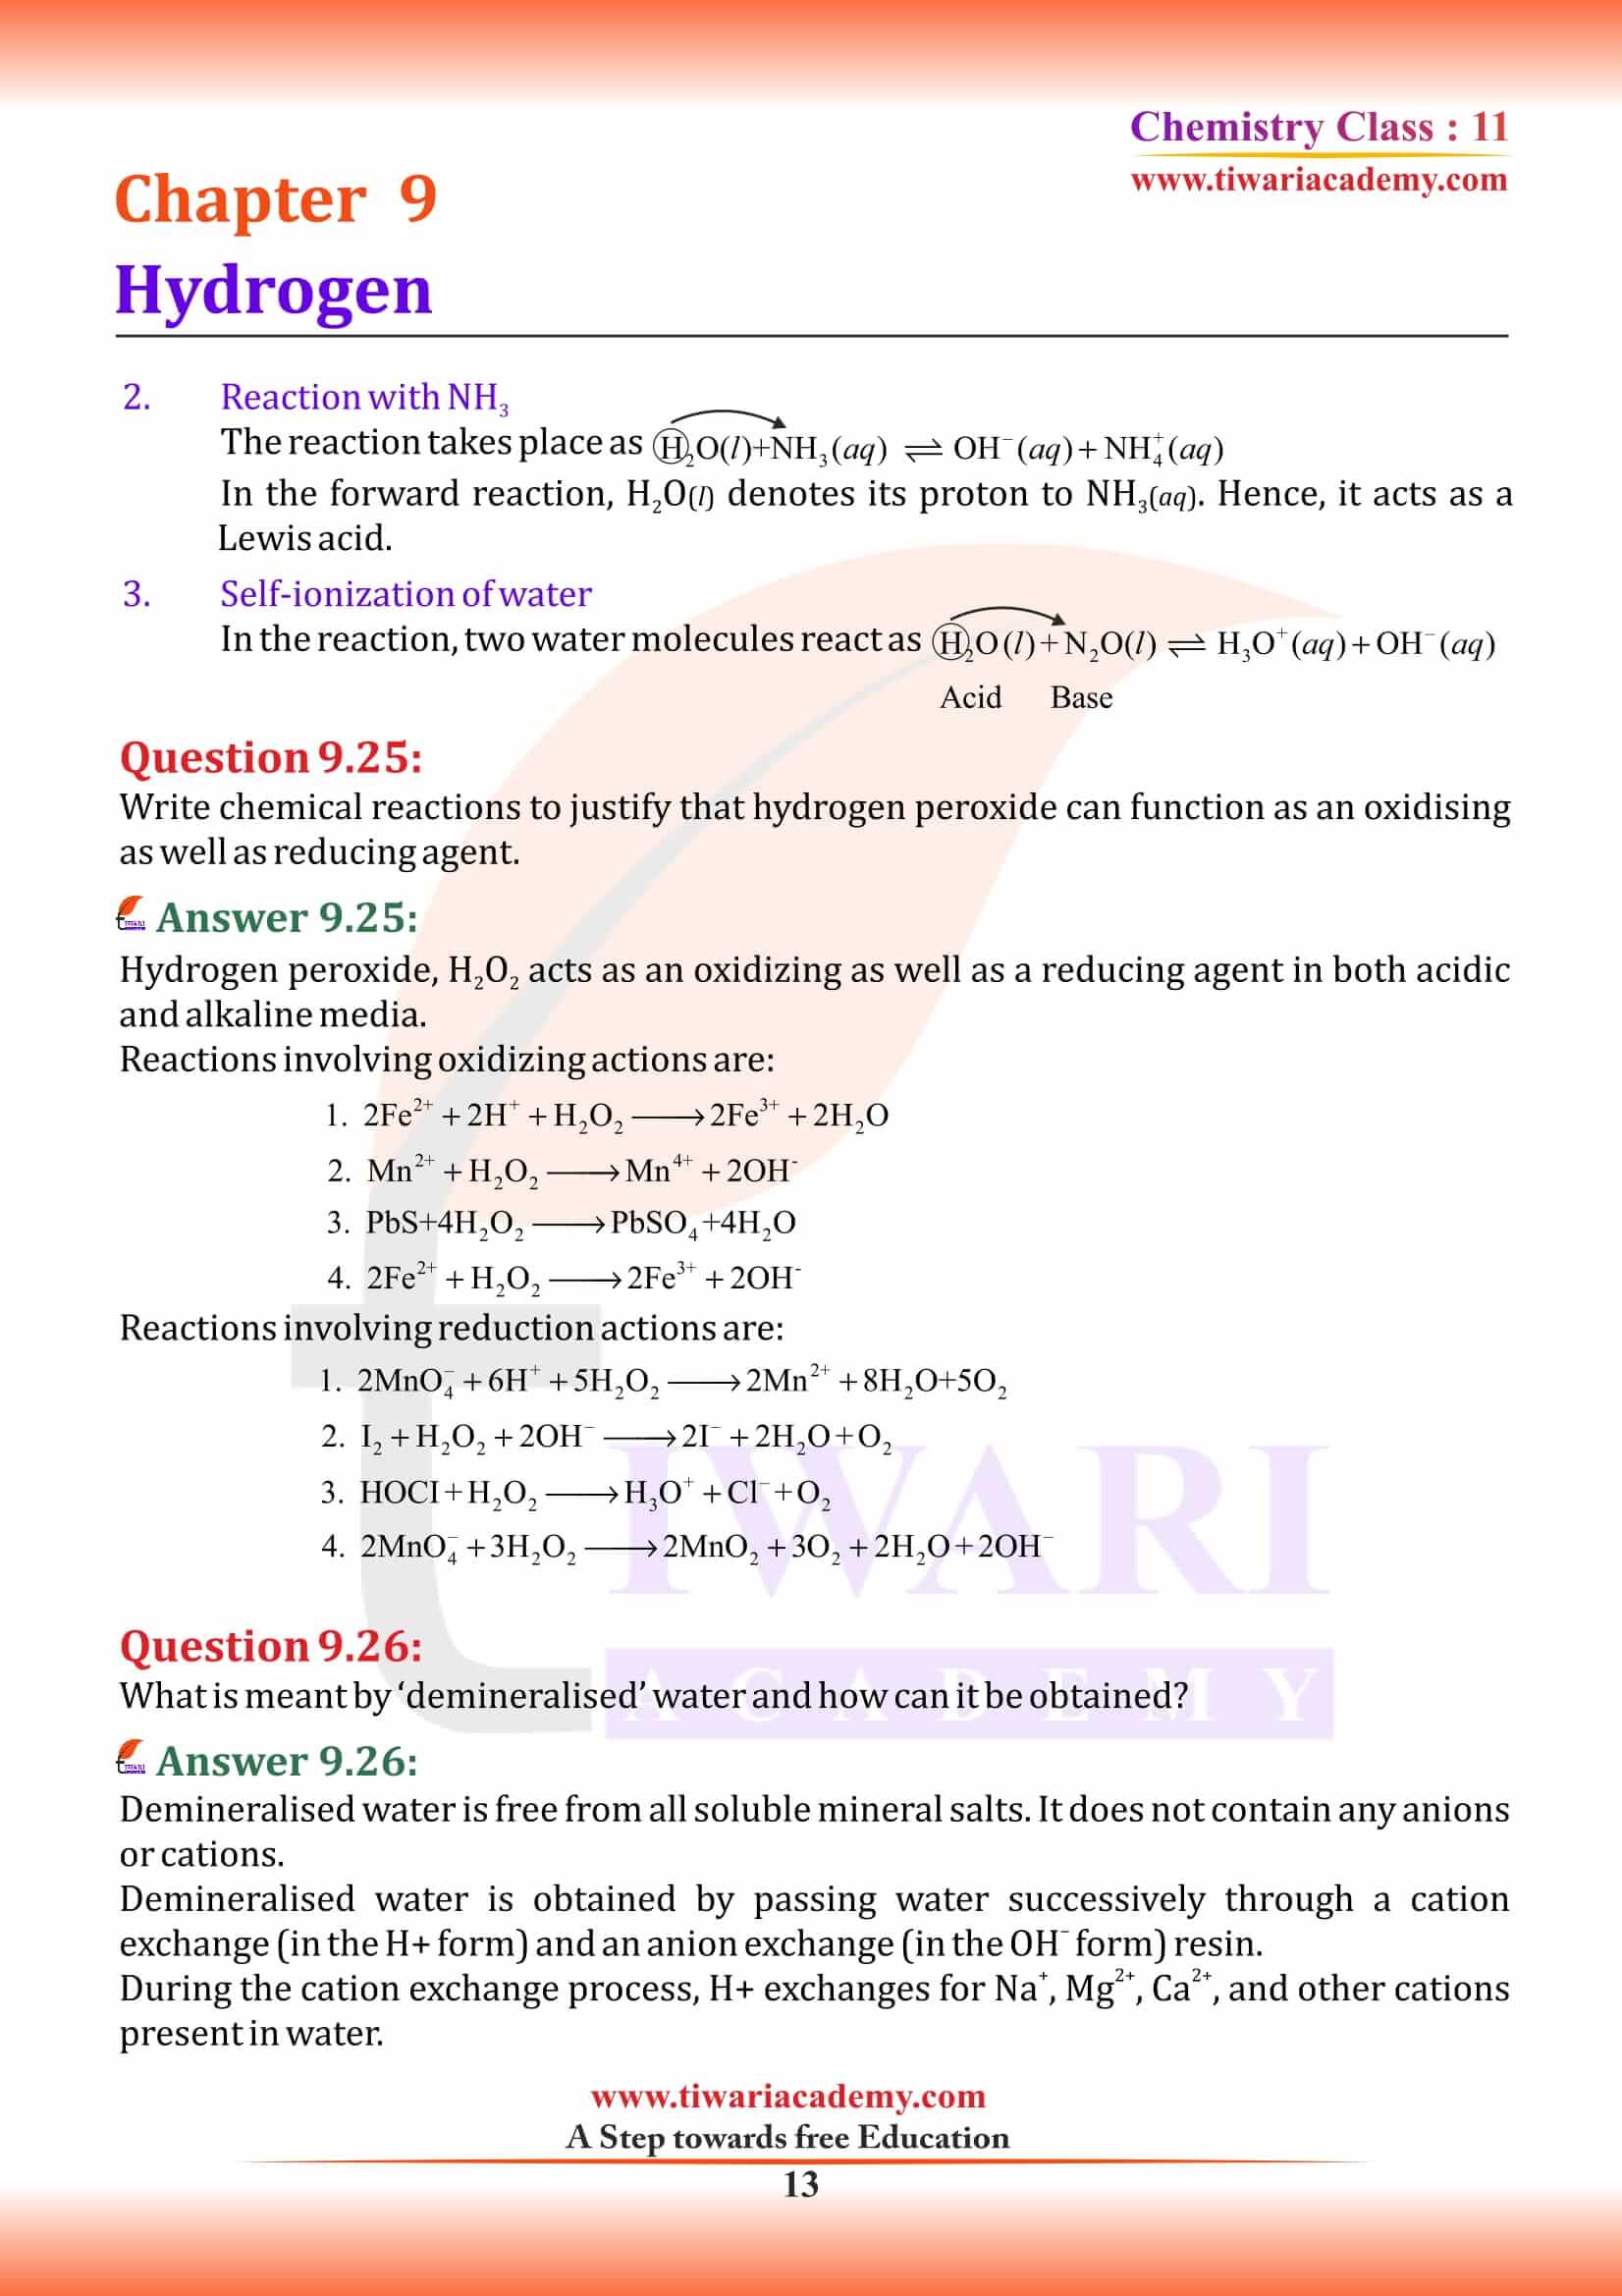 Class 11 Chemistry Chapter 9 PDF solutions